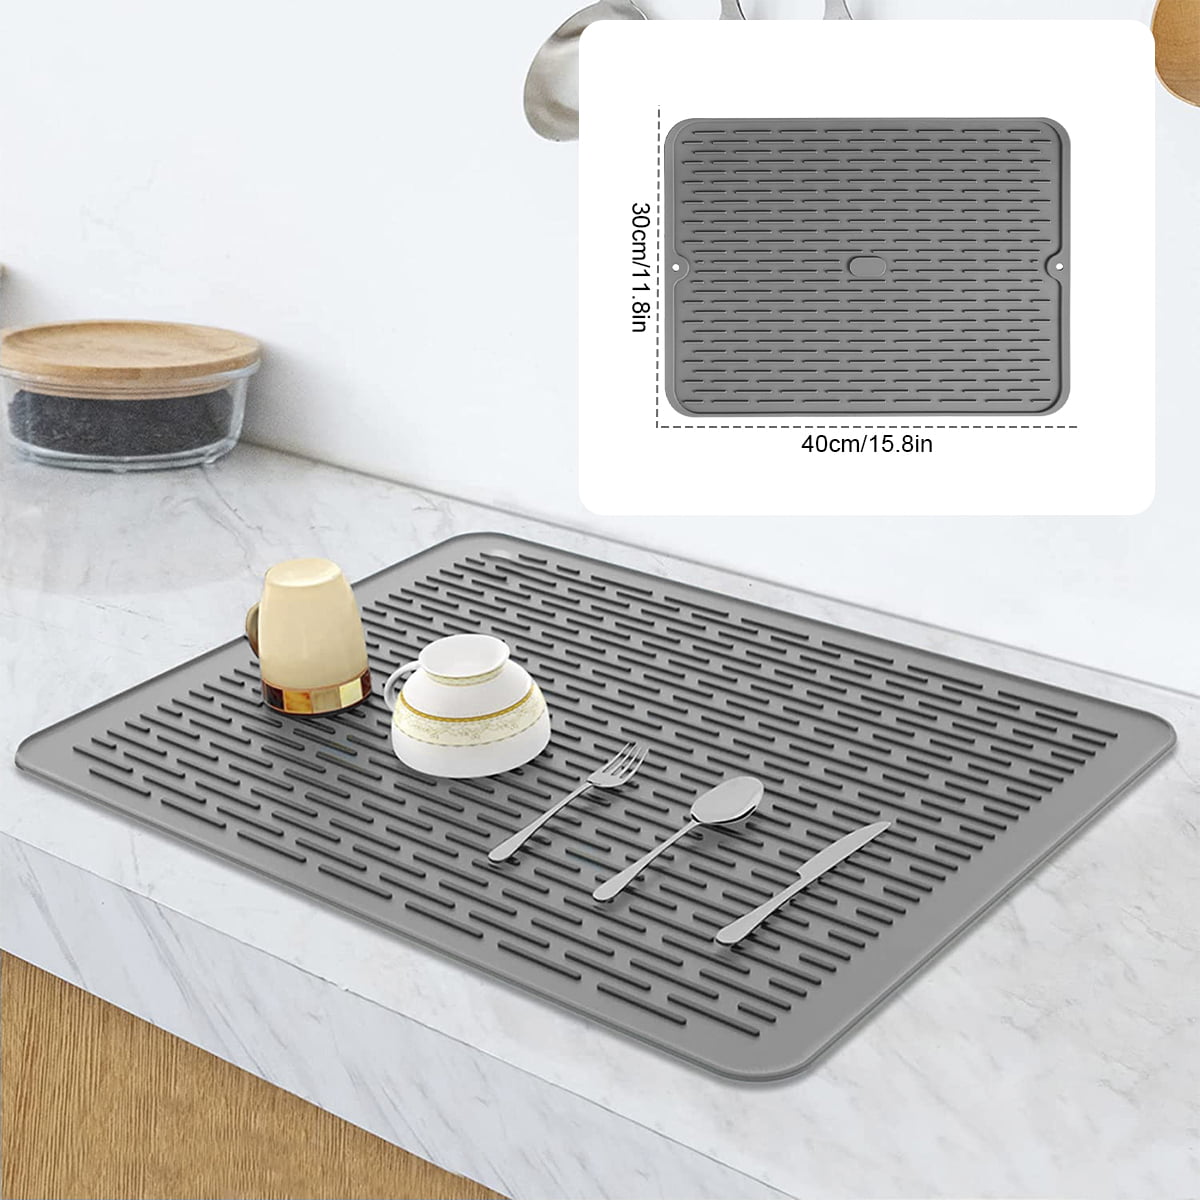 Dropship Dish Drying Mat Flexible Silicone Rubber Mat Heat Resistant  Silicone Trivet Counter Top Mat Dish Draining Mat Sink Mat Place Mat  Kitchen Sink Mat to Sell Online at a Lower Price